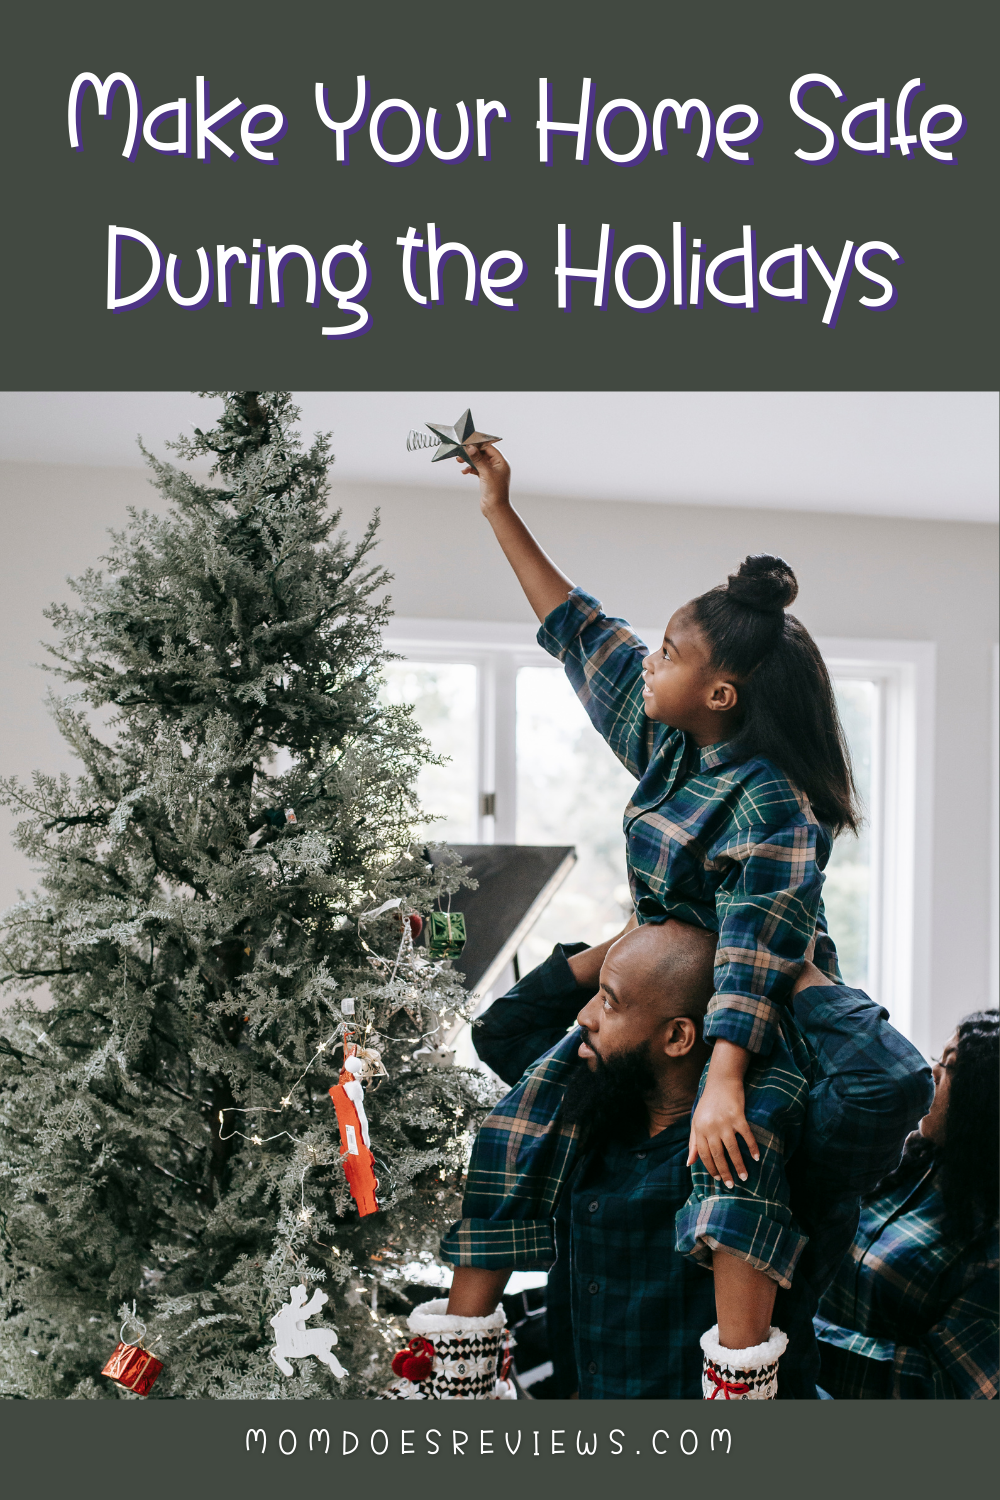 5 Ways Parents Can Make Their Homes Safer for Kids During the Holidays